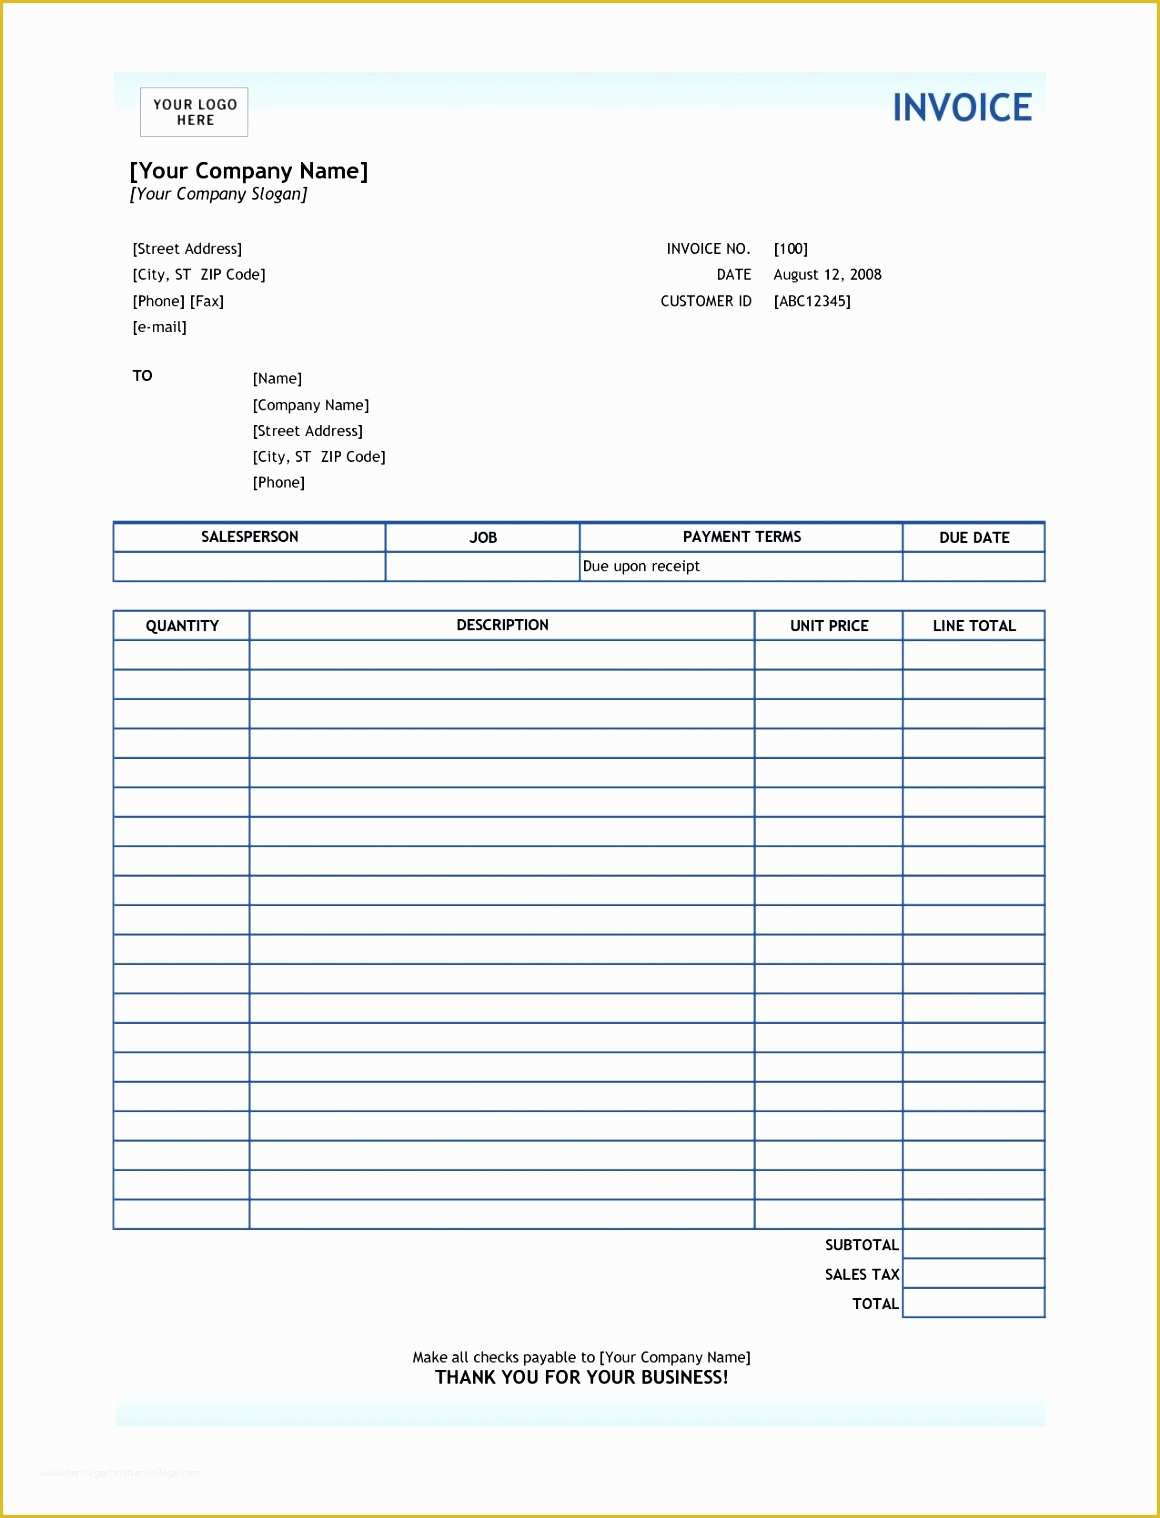 Microsoft Excel Invoice Template Free Of 10 Microsoft Excel Invoice Template Free Download